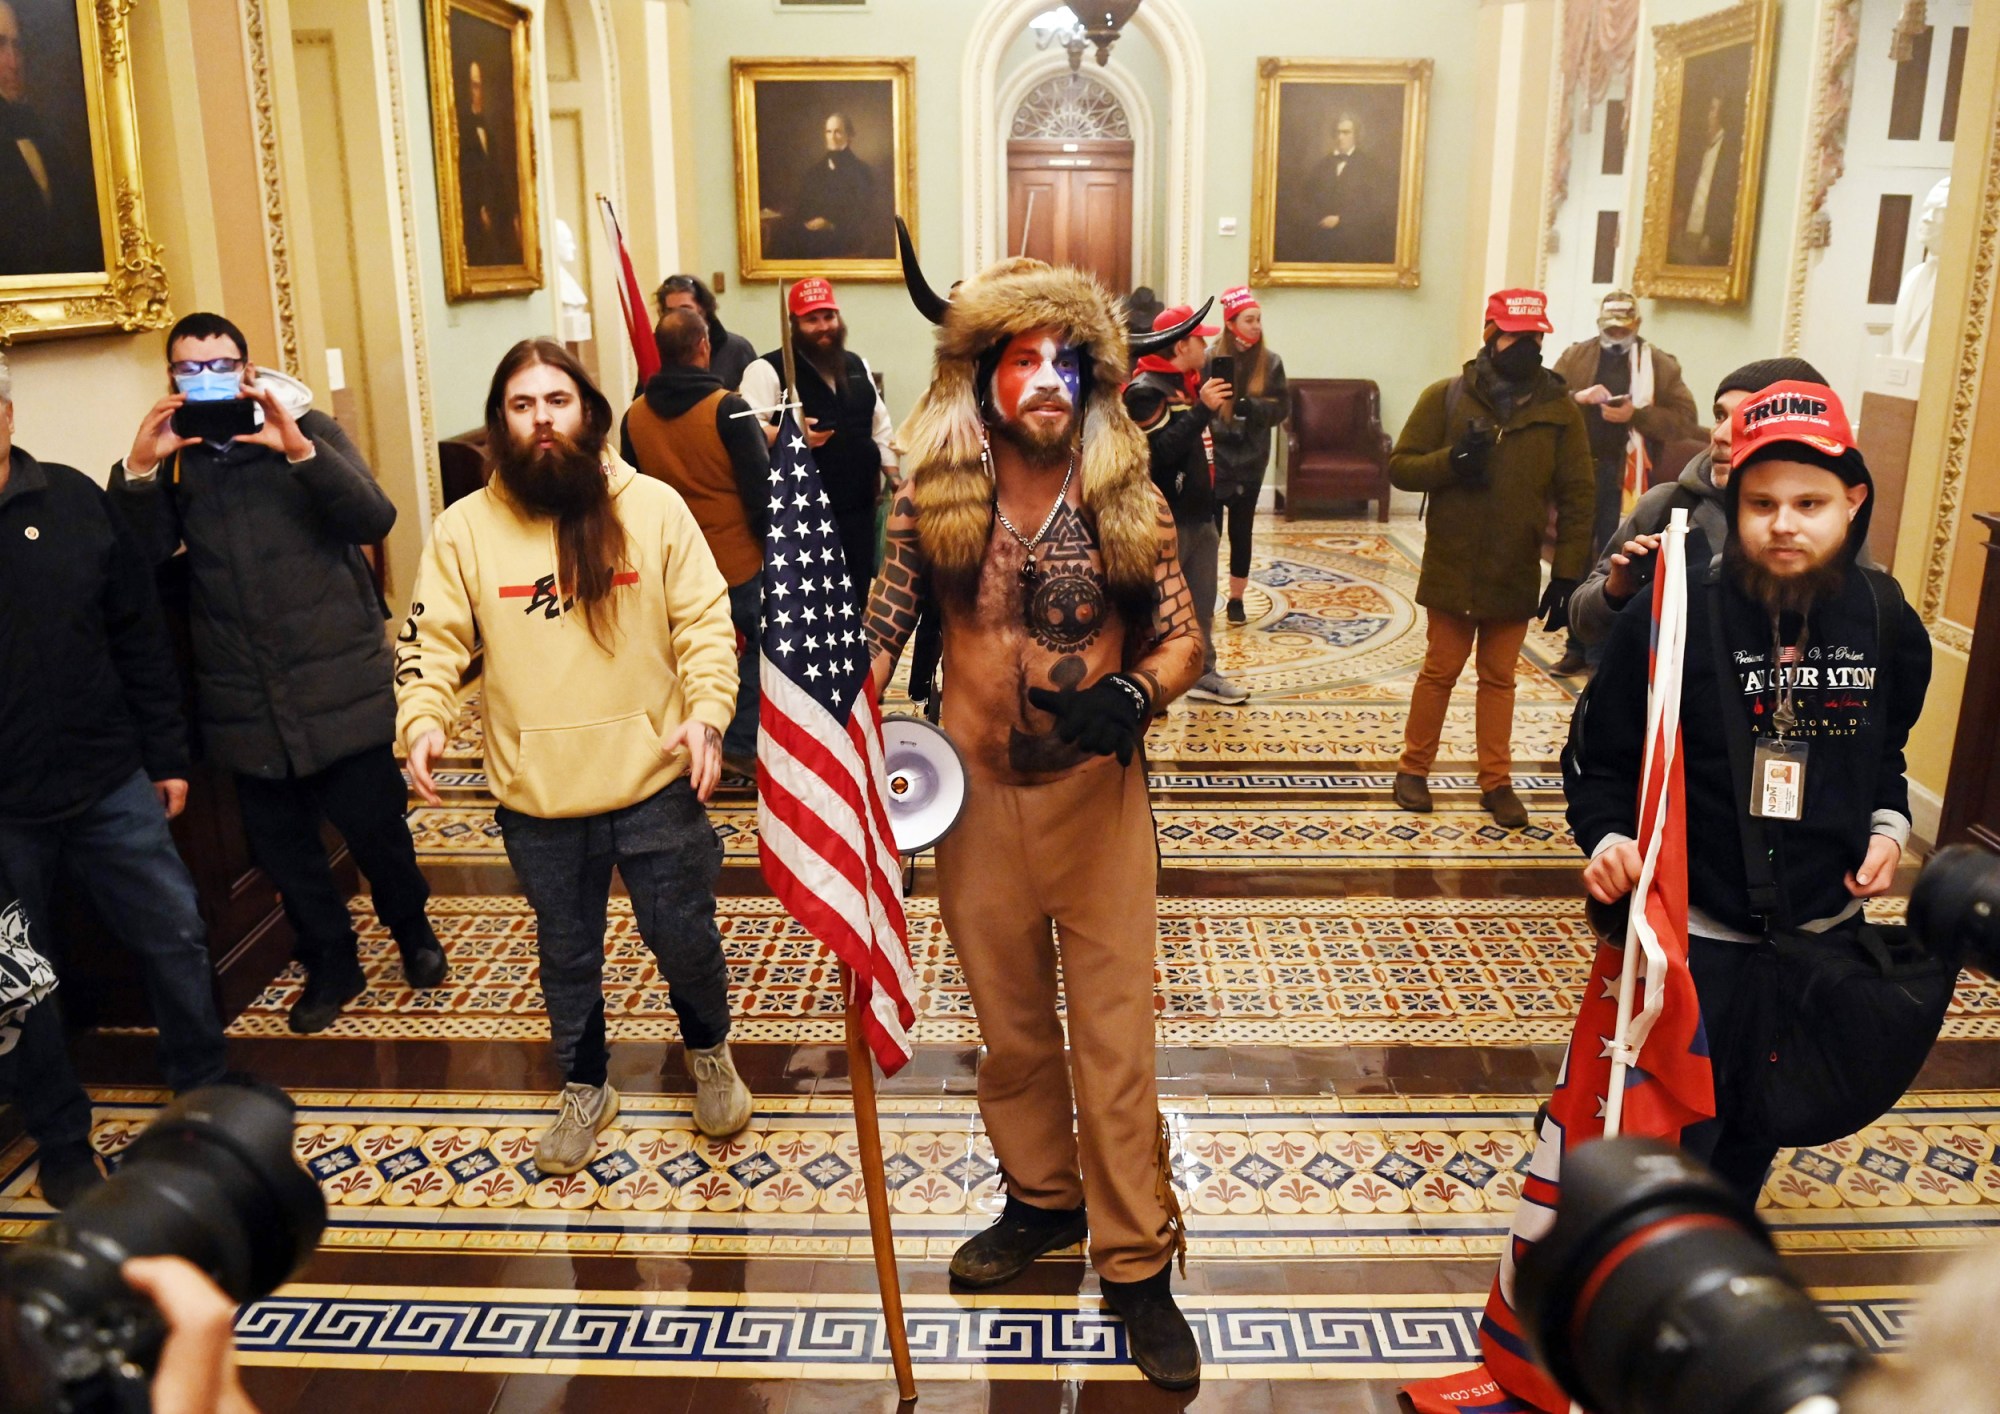 Trump-supporters pose for photos during US Capitol riot. January 6, 2021